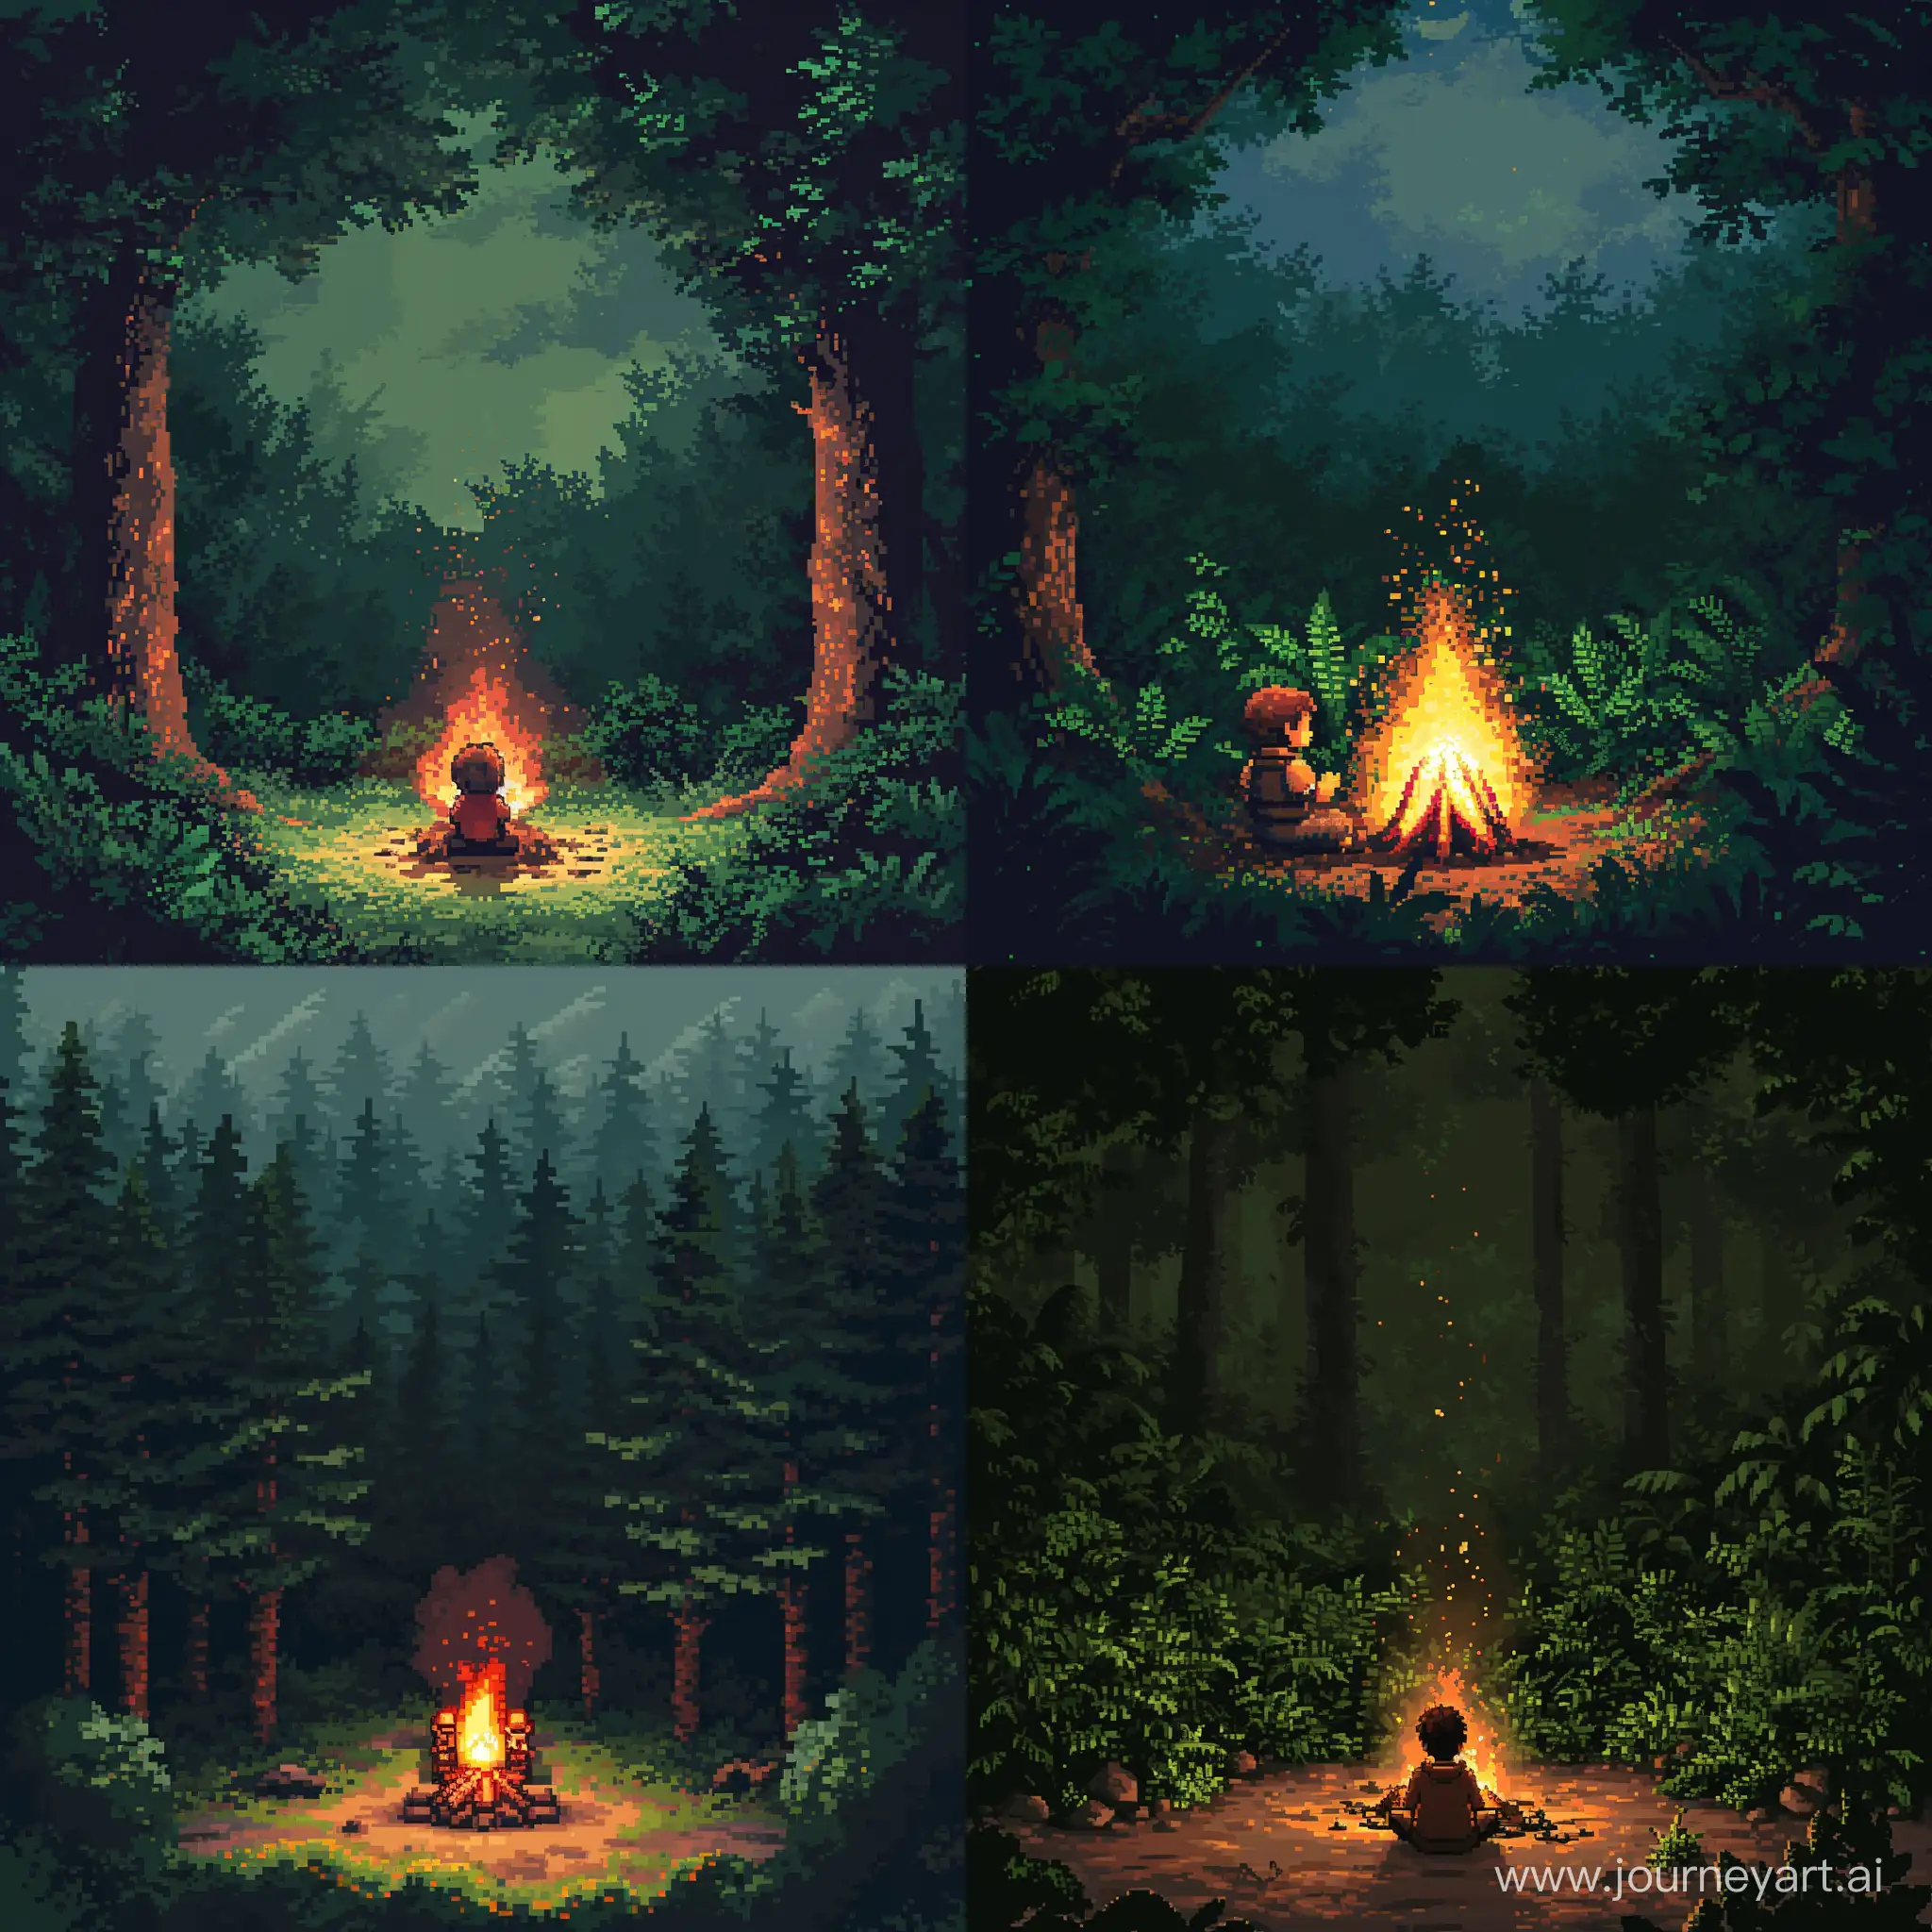 generate an 8bit image of a character sitting in front of a campfire with a dense forest as background